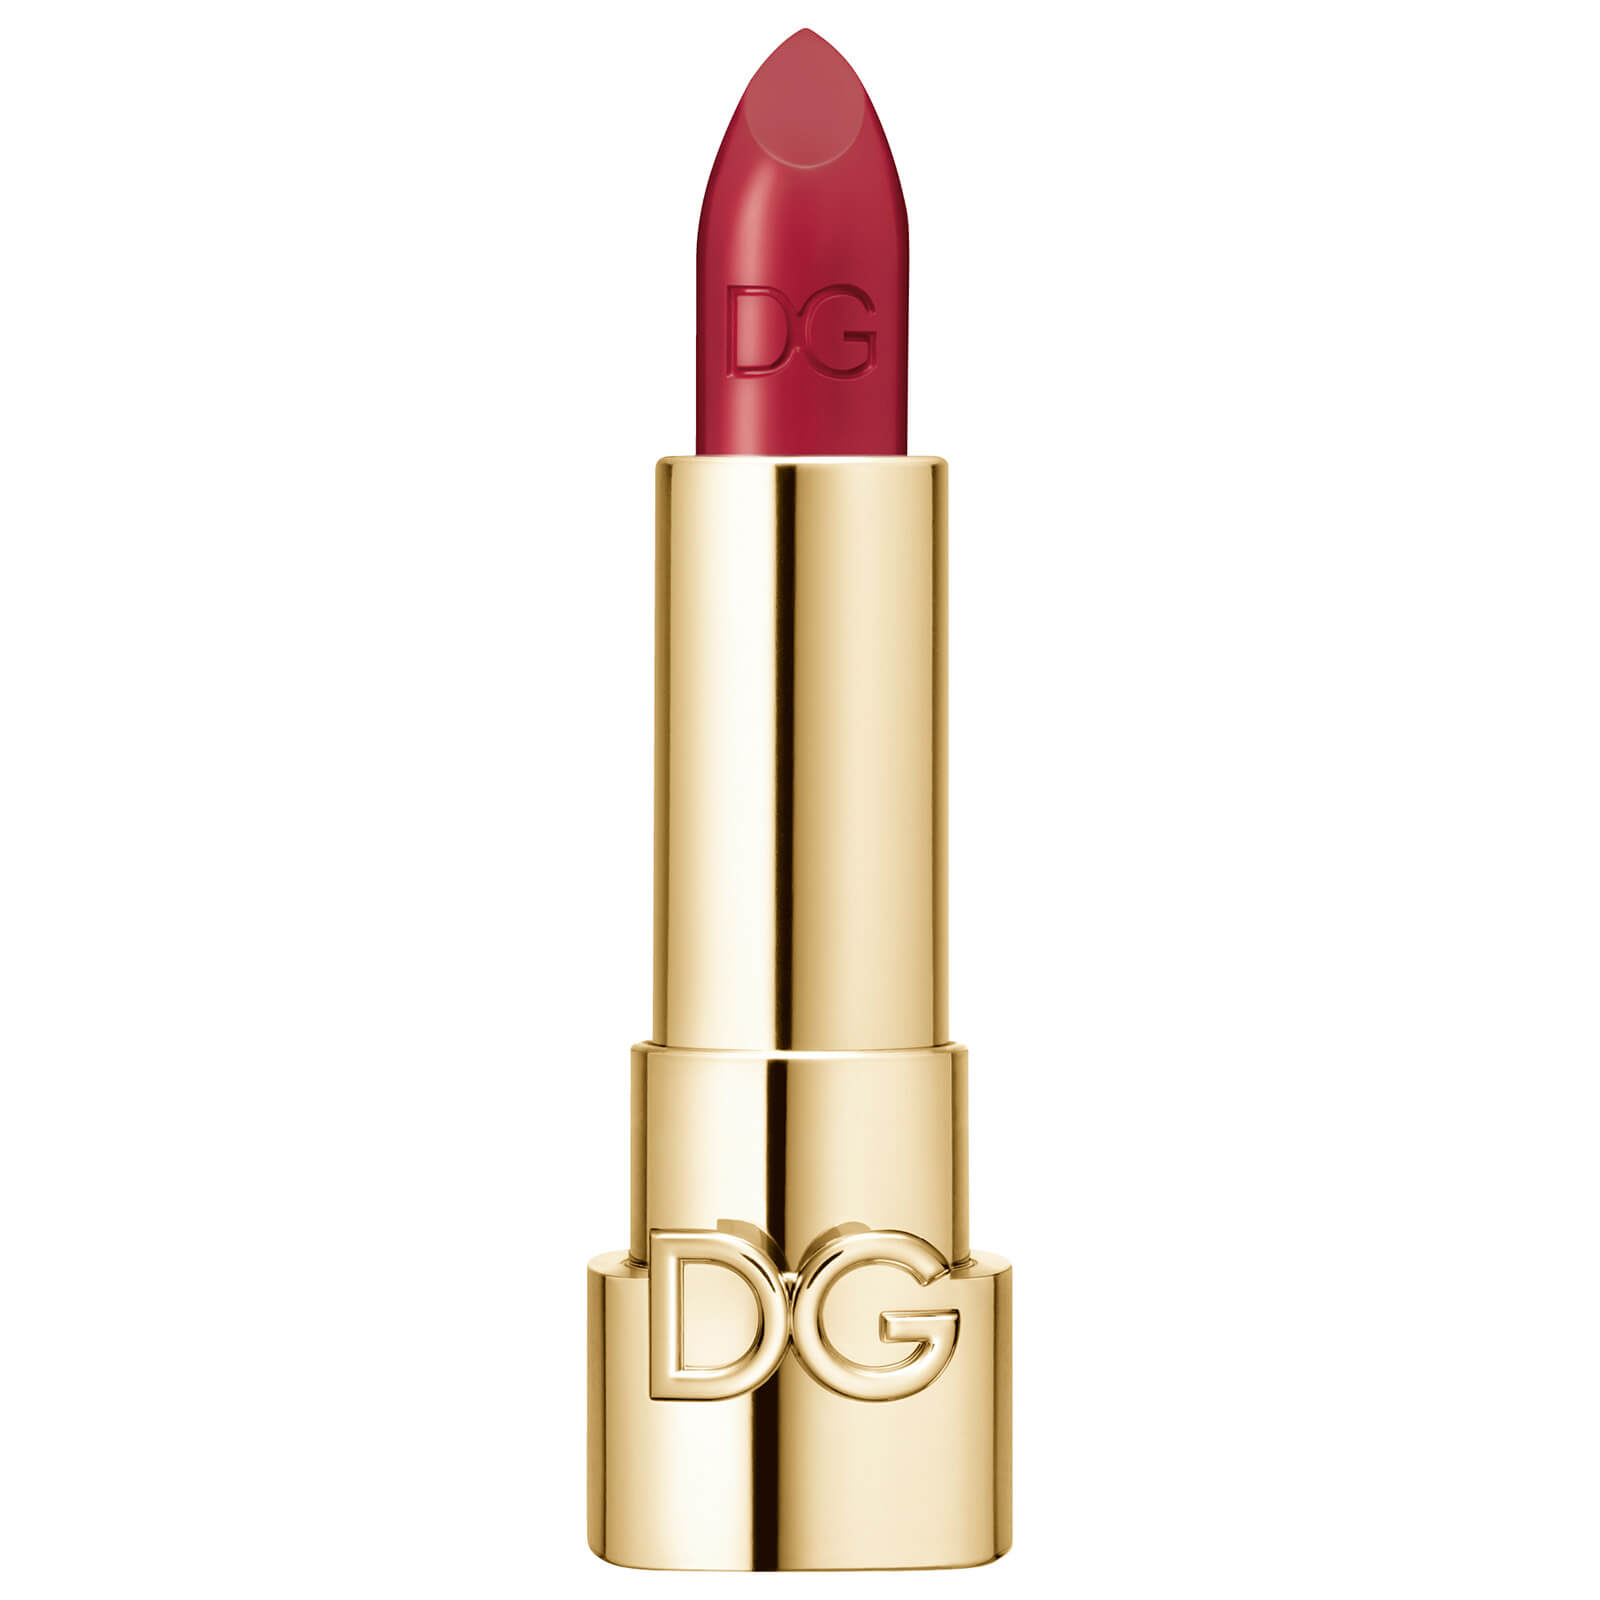 Image of Dolce&Gabbana The Only One Lipstick 1.7g (No Cap) (Various Shades) - 640 #DGAmore